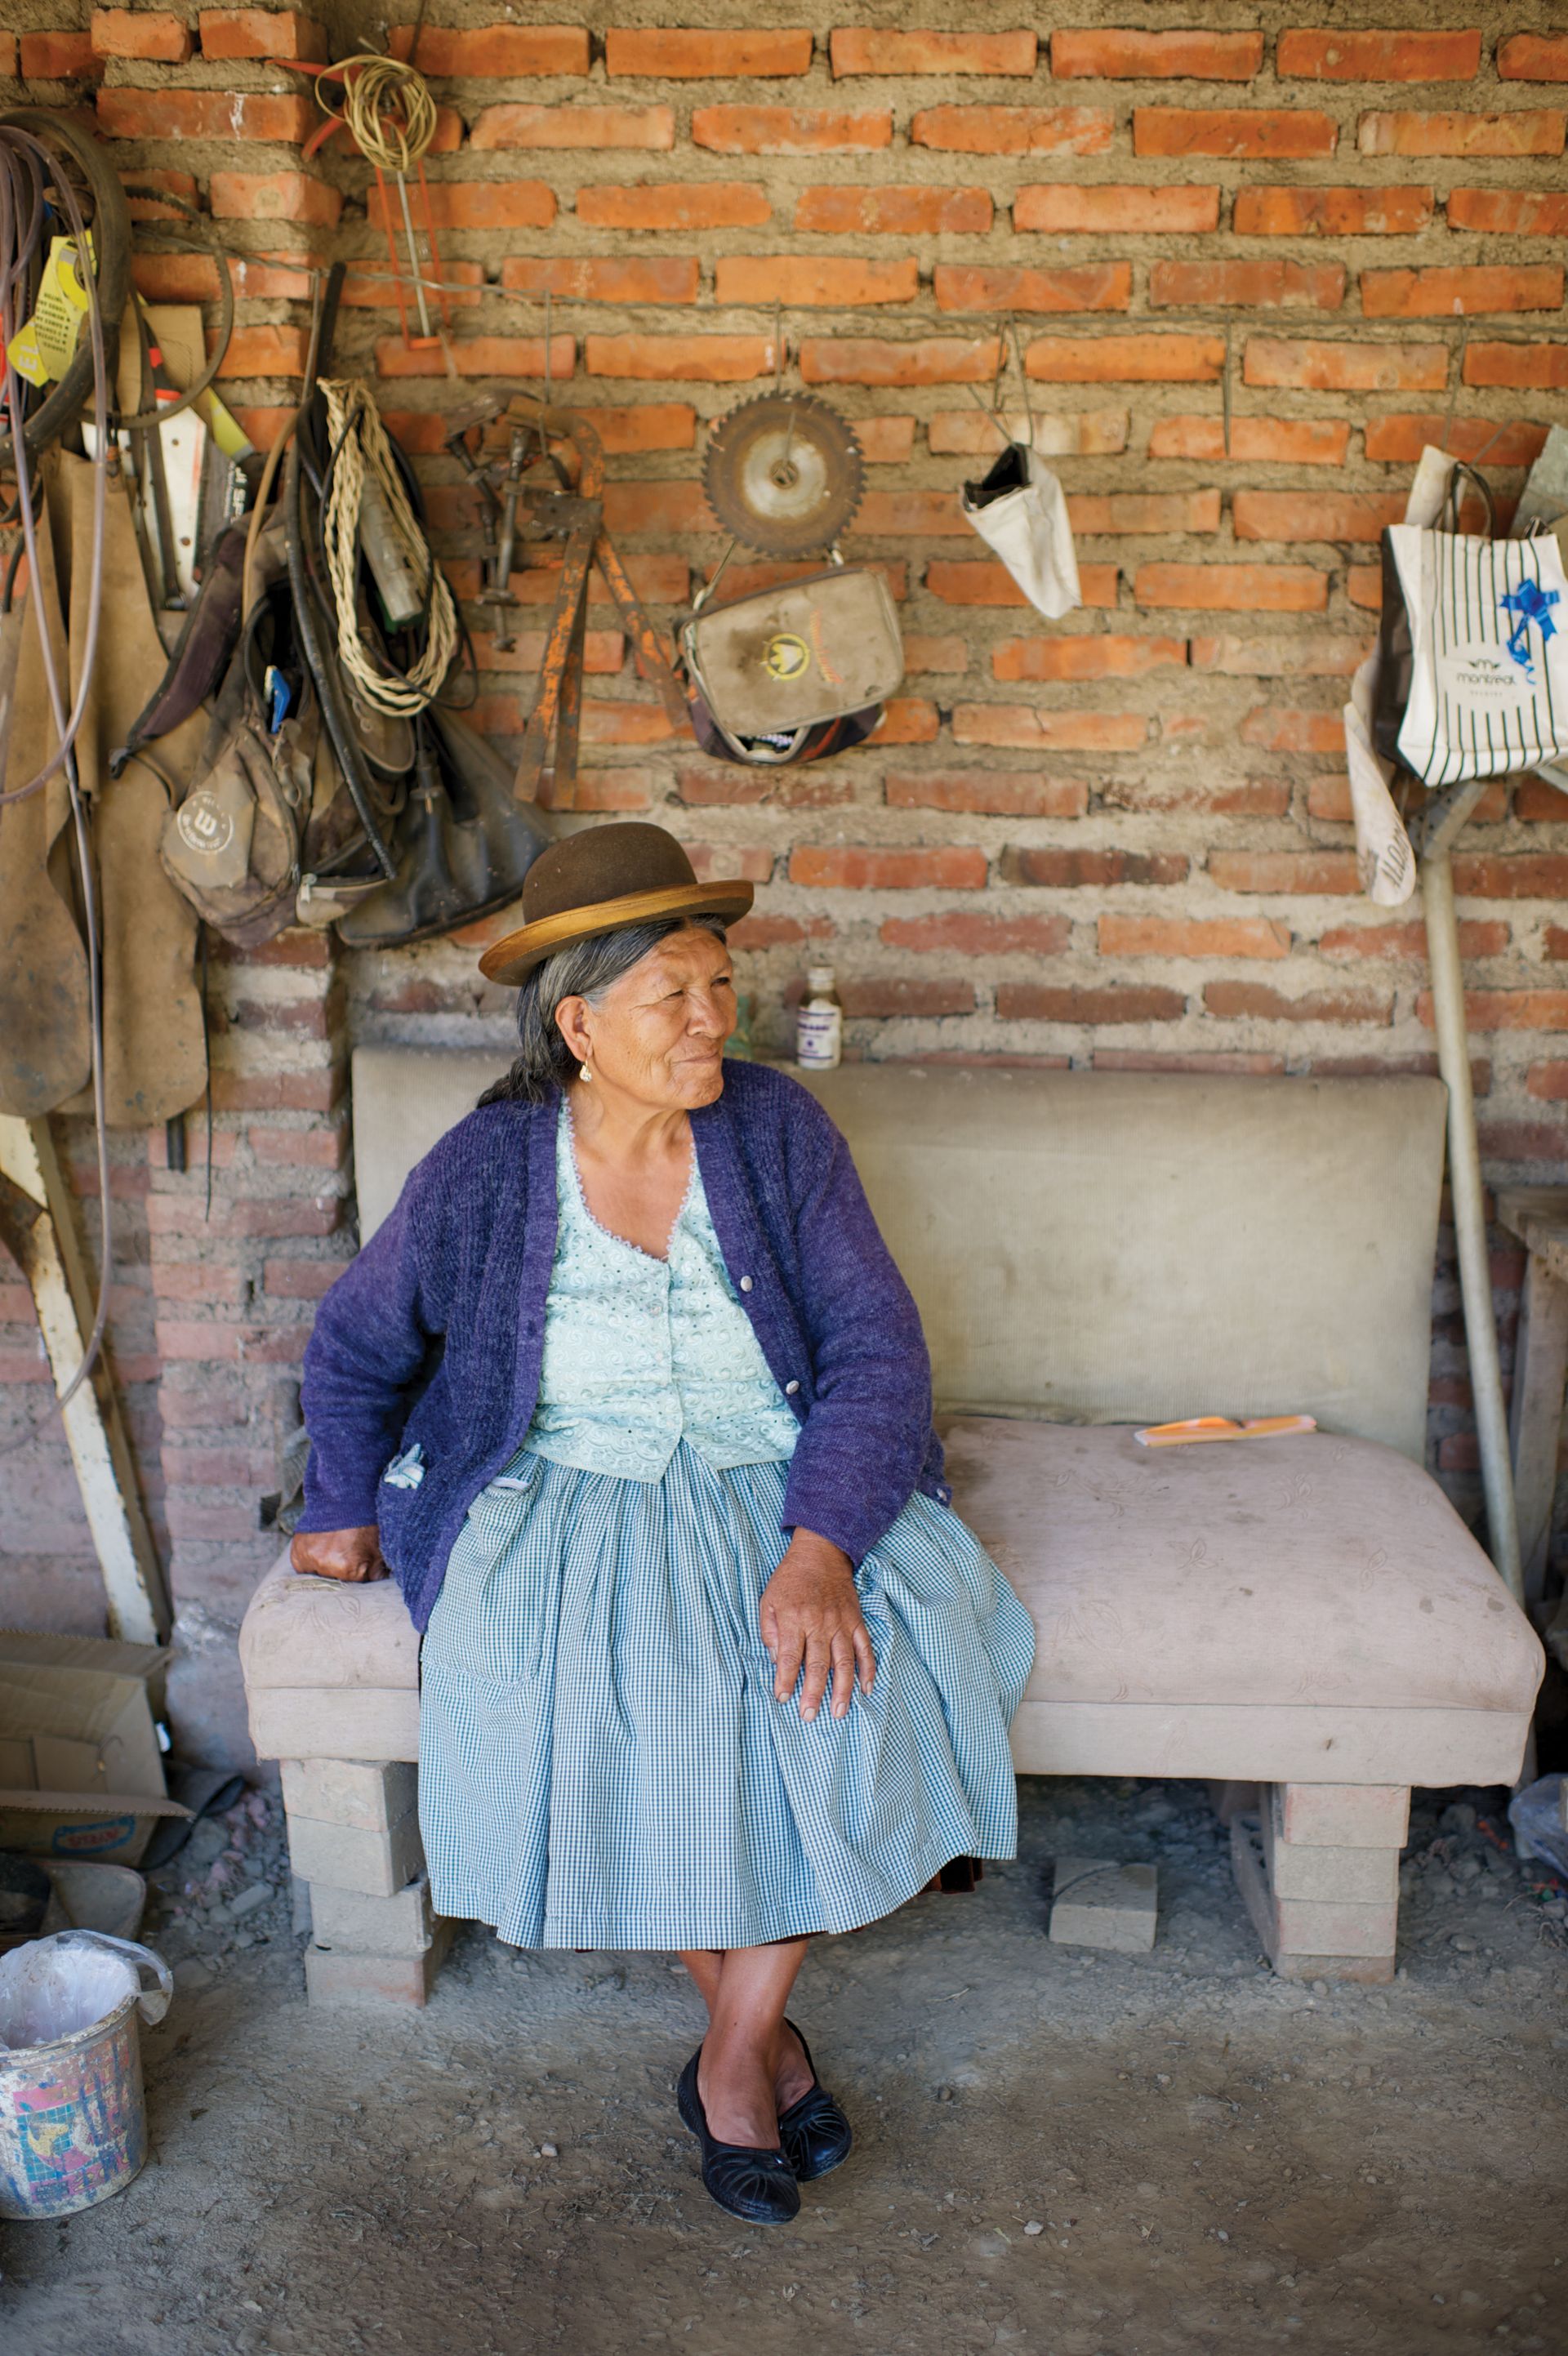 An elderly woman in Bolivia sitting on a bench.